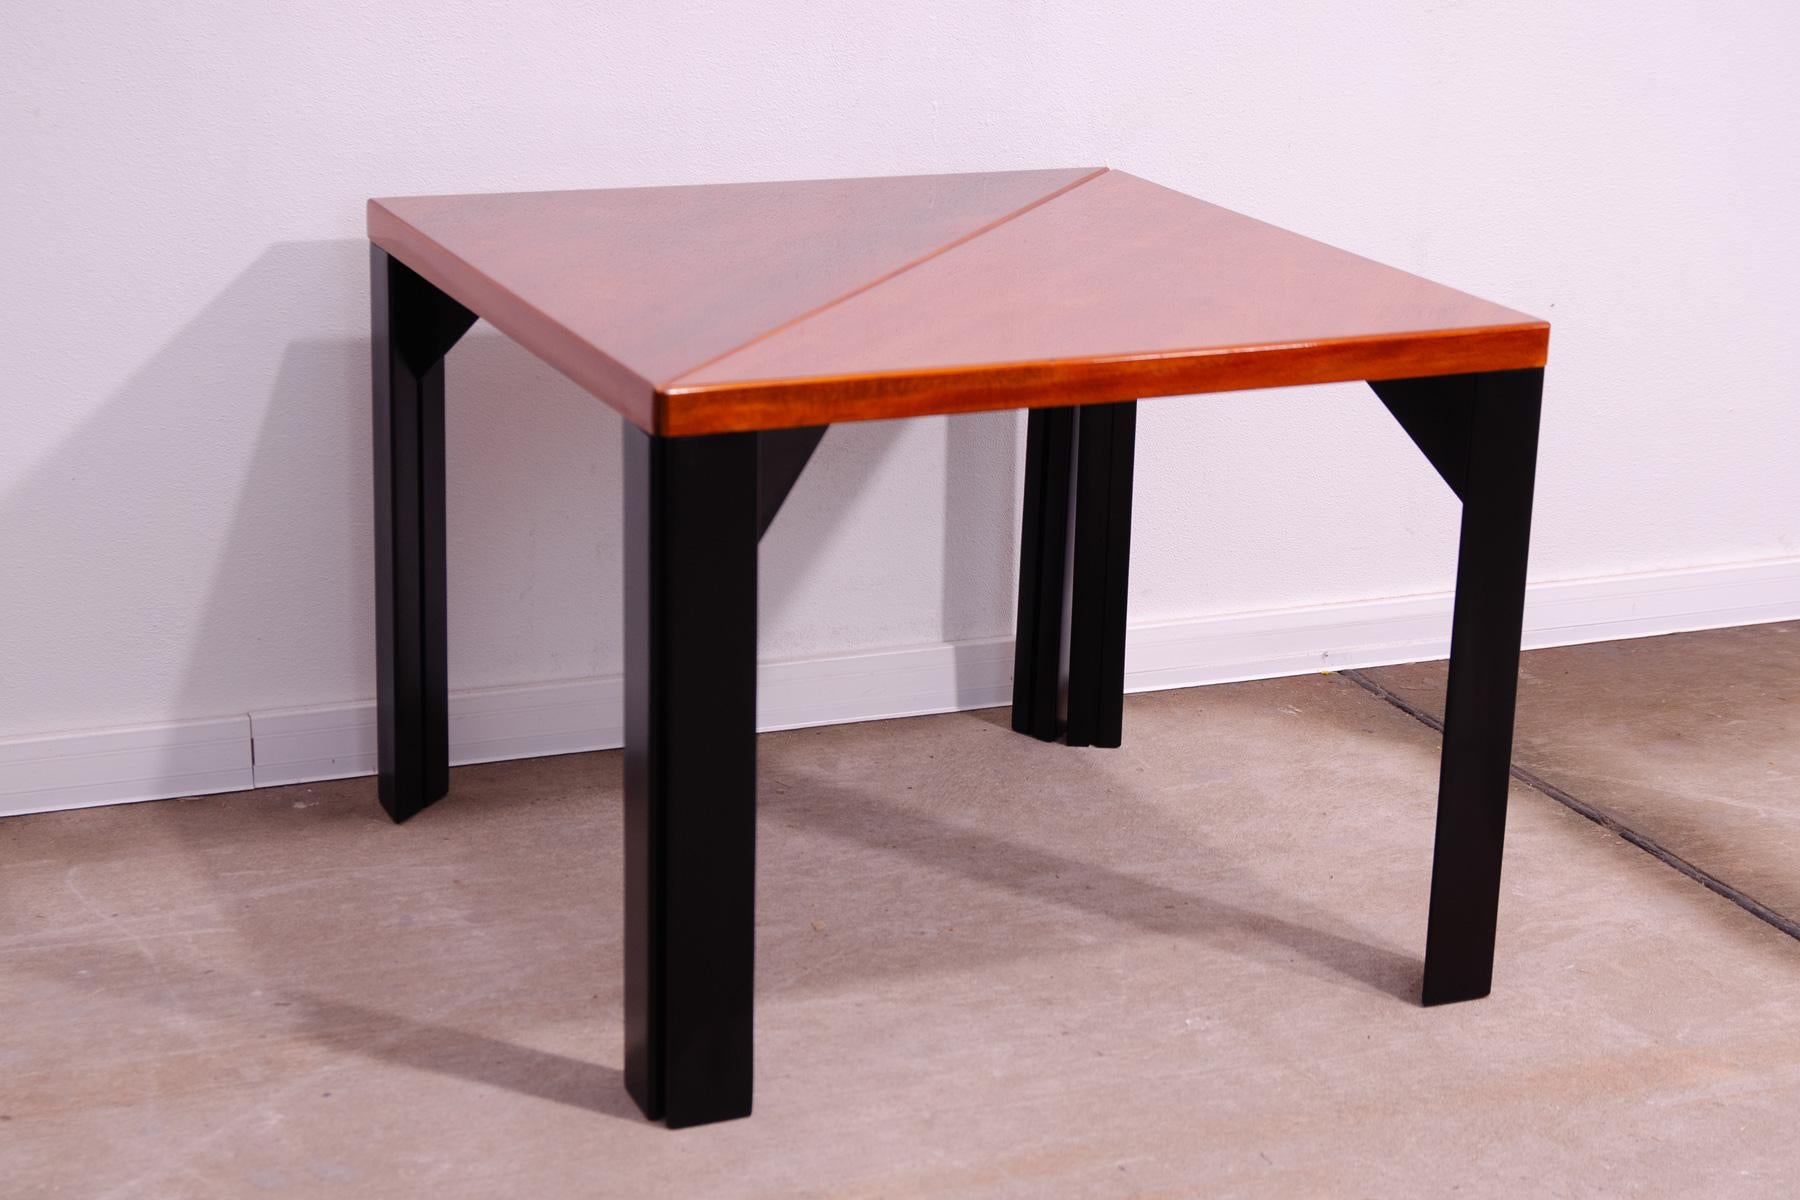 This modular table was made in the 70s in Central Europe. By dividing into two tables, you get two pieces that you can place differently in the space. It is made of wood and is lacquered to a high gloss. In excellent condition, fully professionally